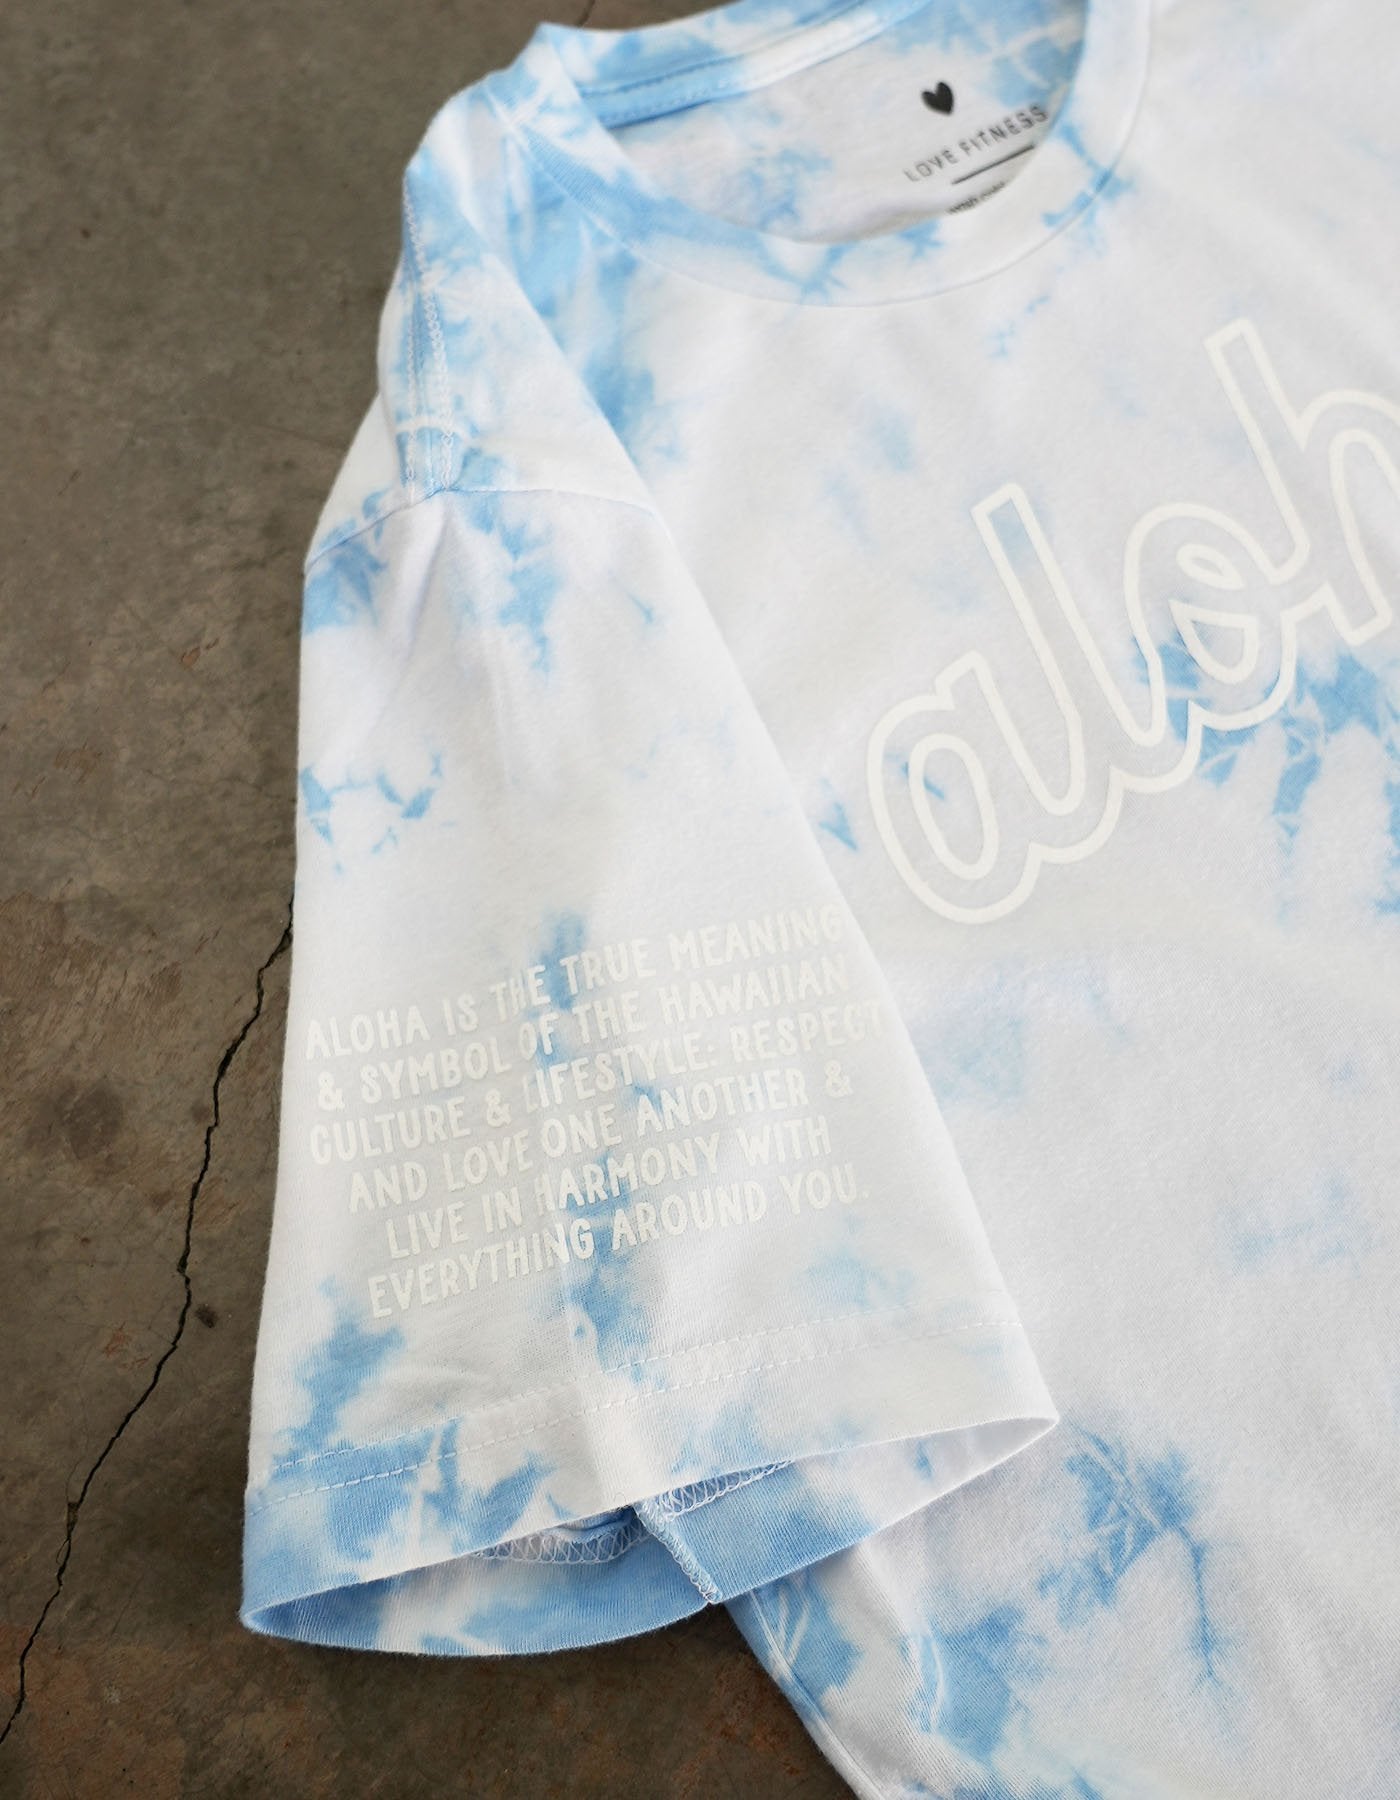 Love fitness aloha every day sky blue tie dye tee and up close picture of the right sleeve with the aloha meaning mantra